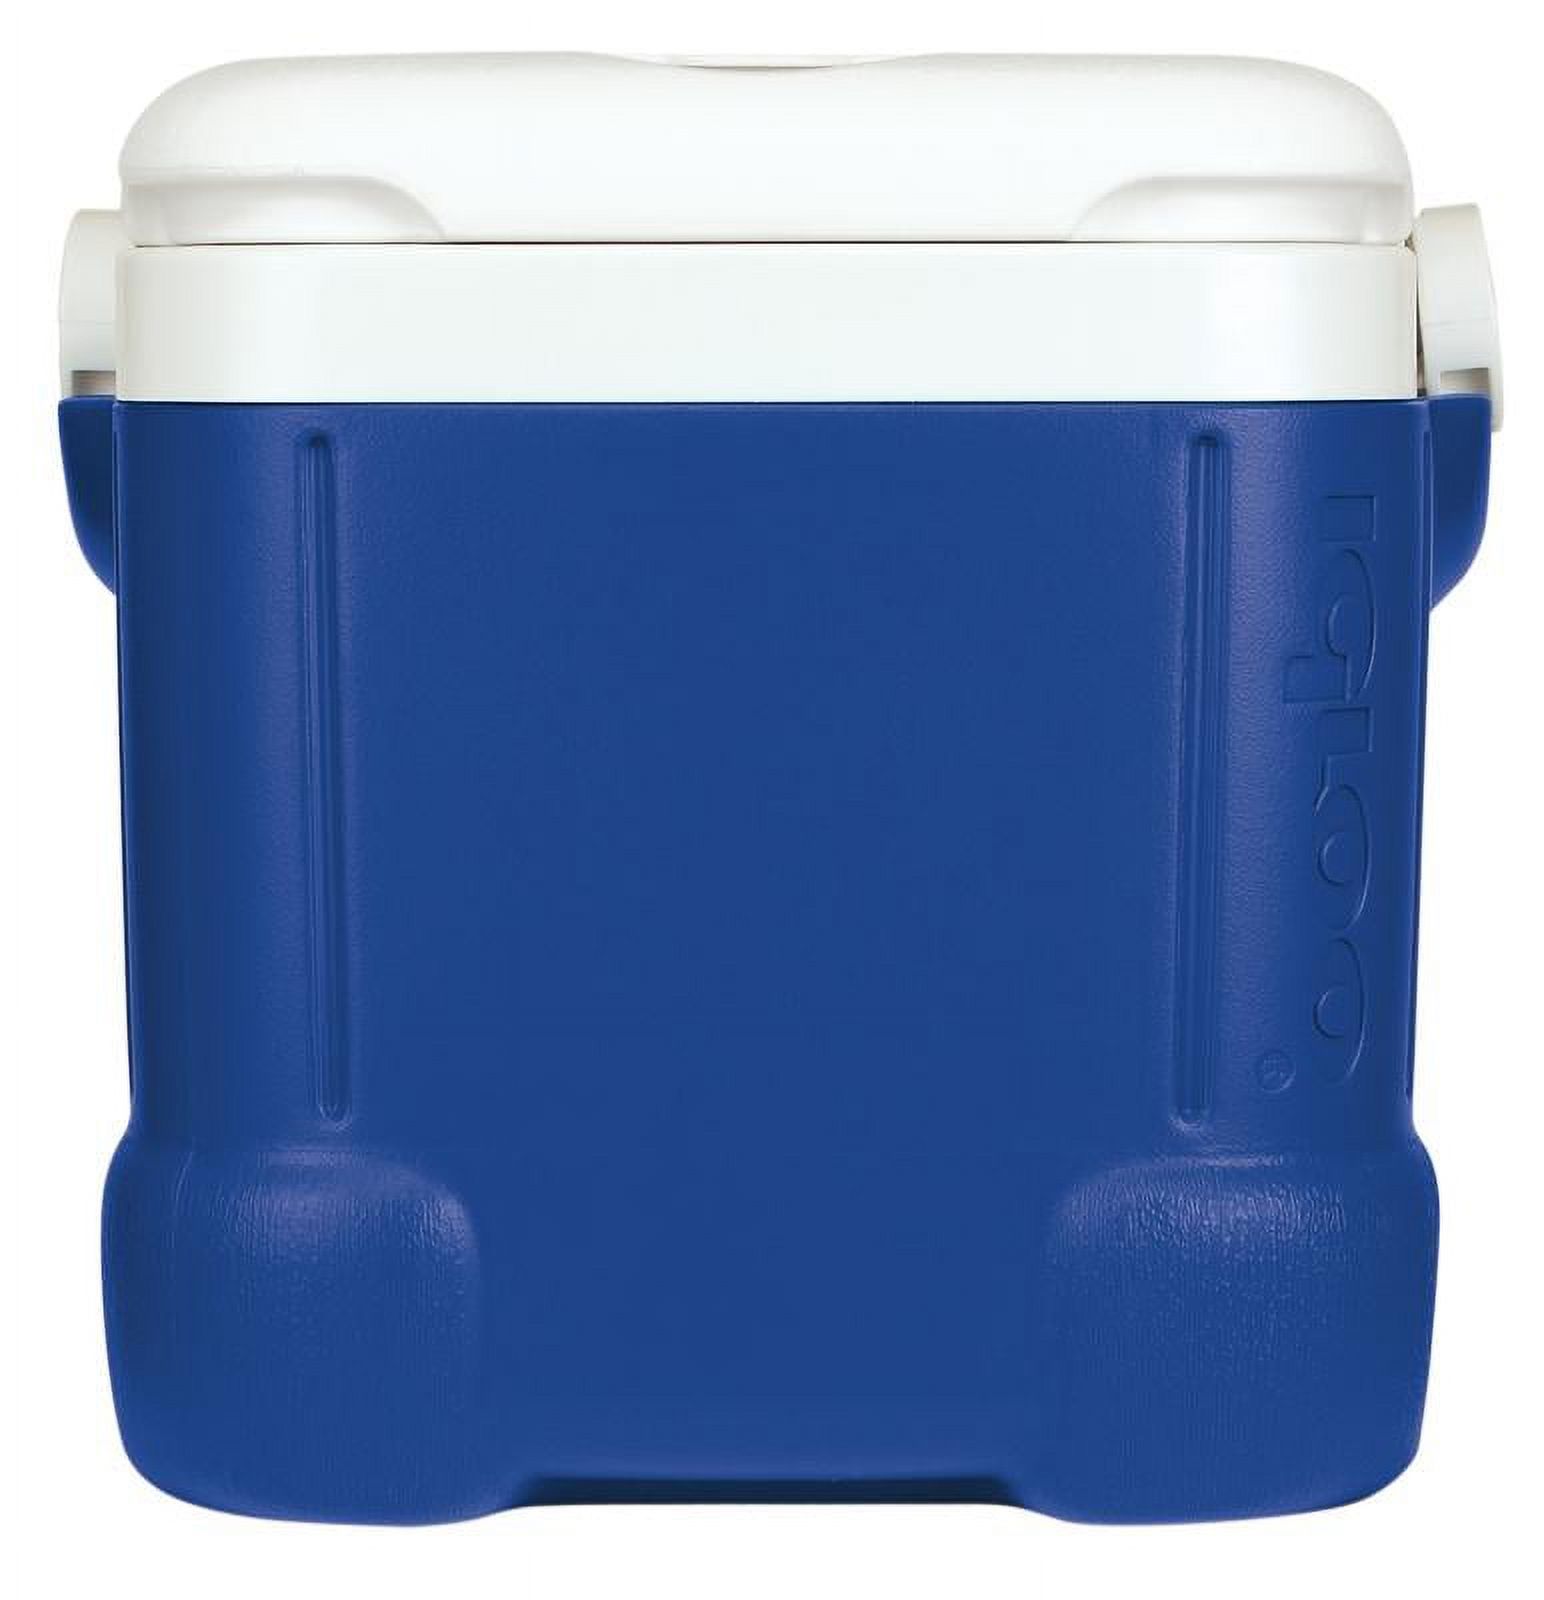 Igloo 60-Quart Ice Cube Roller Cooler - image 1 of 11